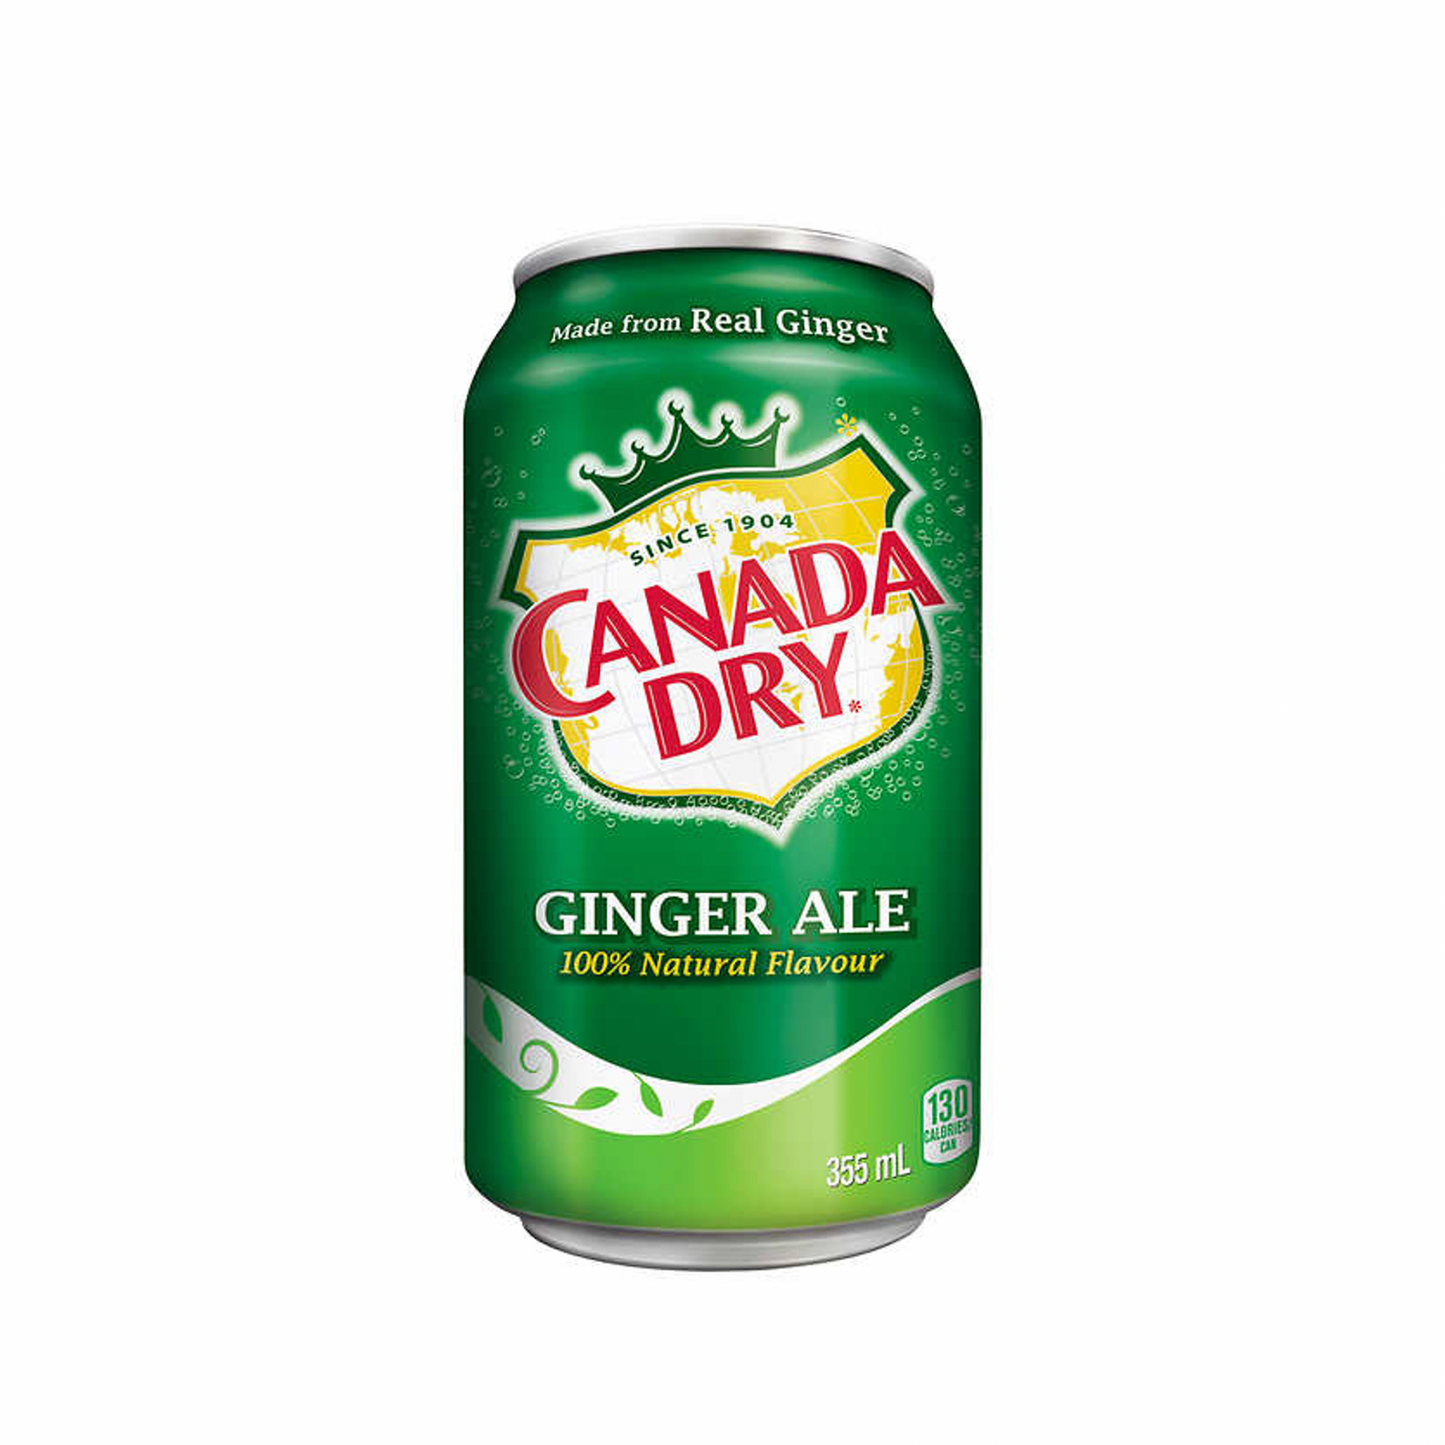 GingerAle Canada Dry